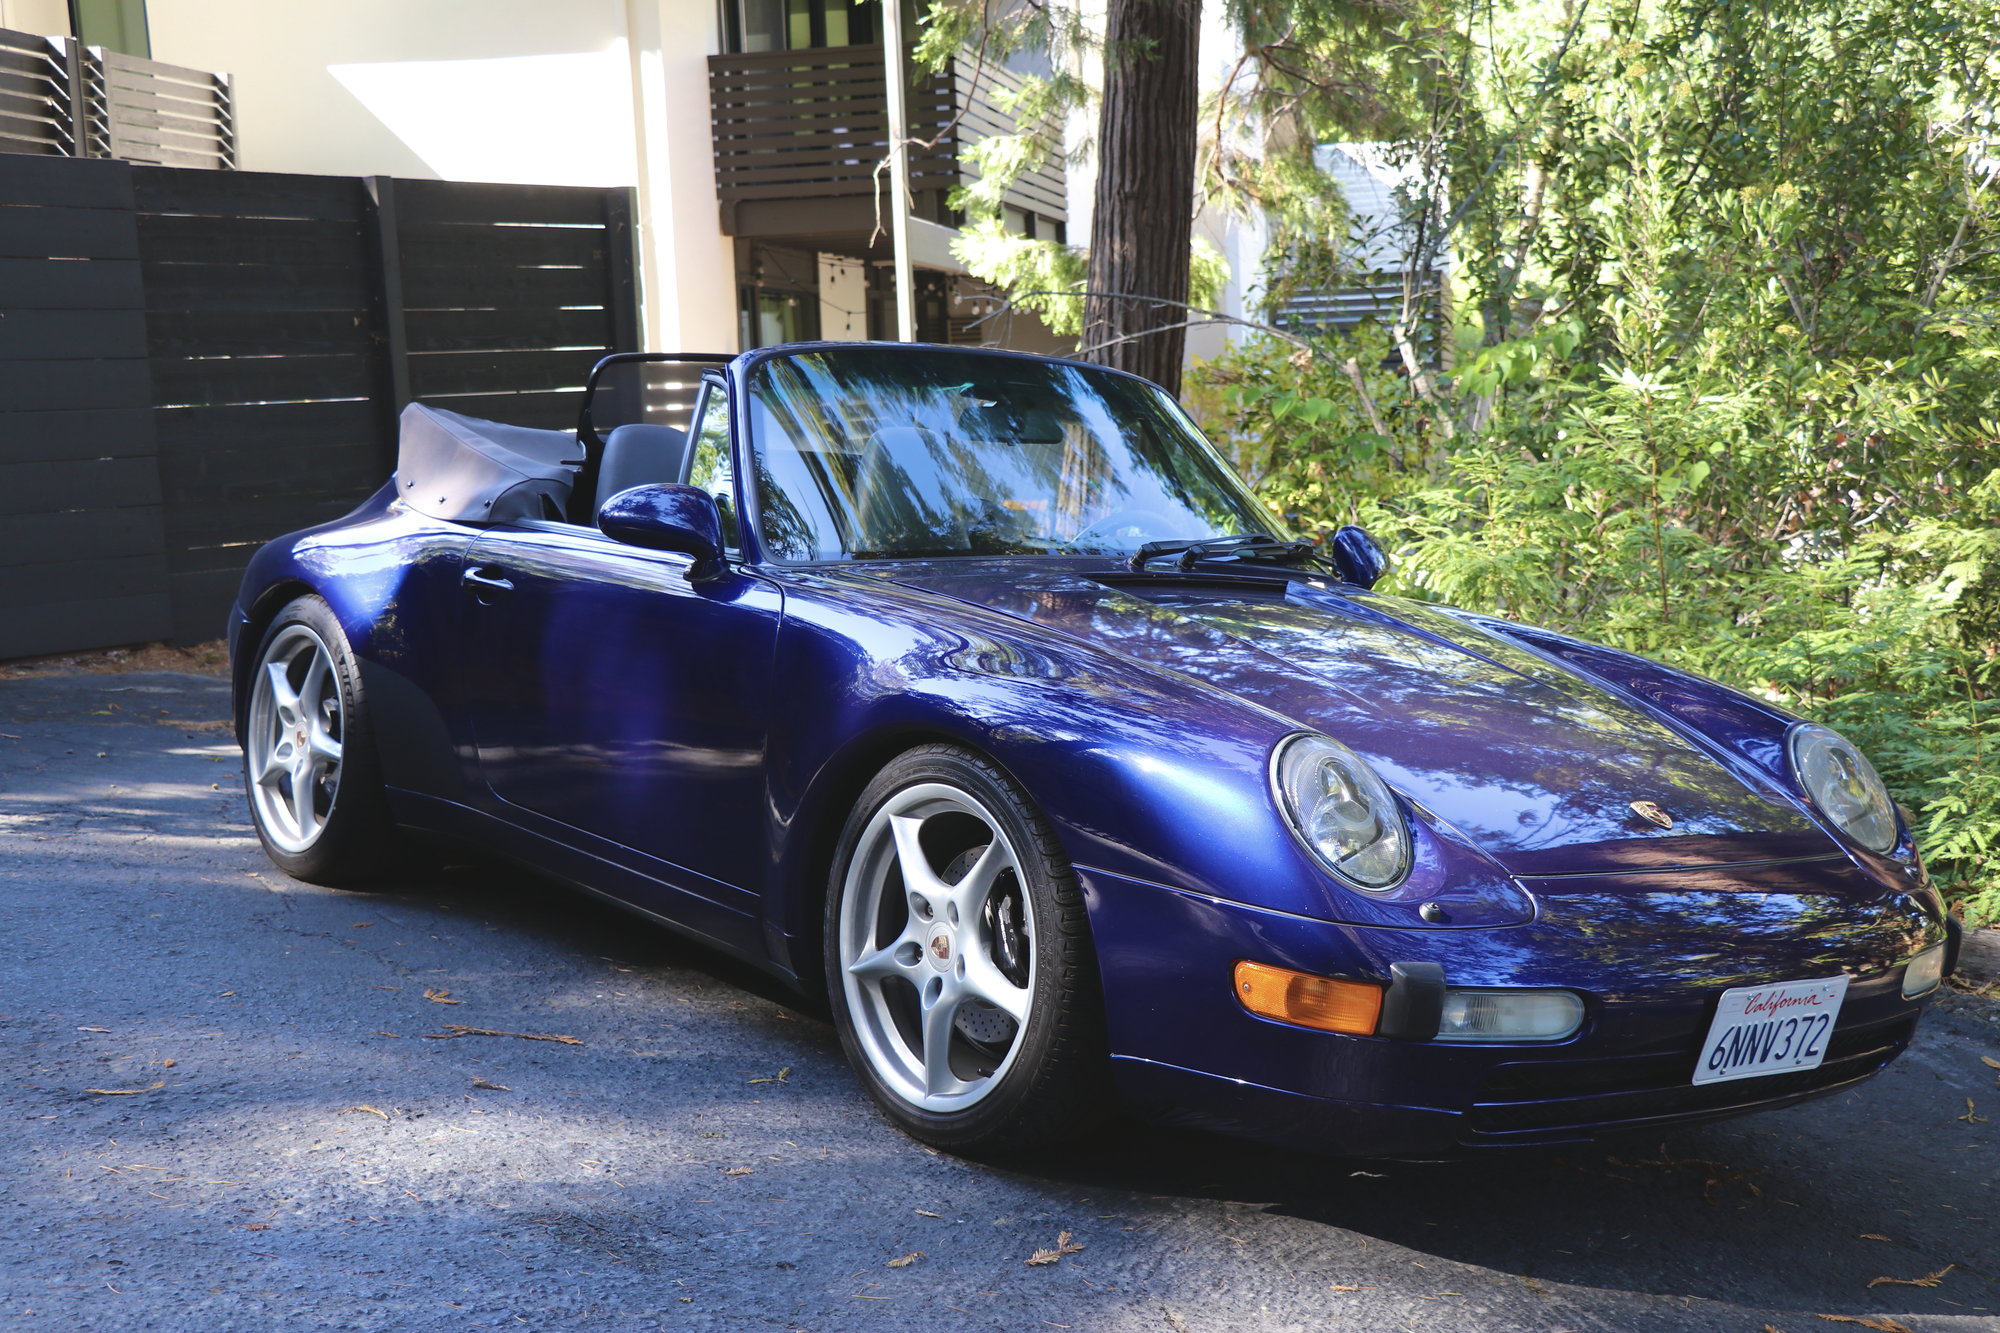 FOR SALE** Iris Blue over Classic Grey 1995 Carrera 2 Cabriolet - New Top!  - Rennlist - Porsche Discussion Forums